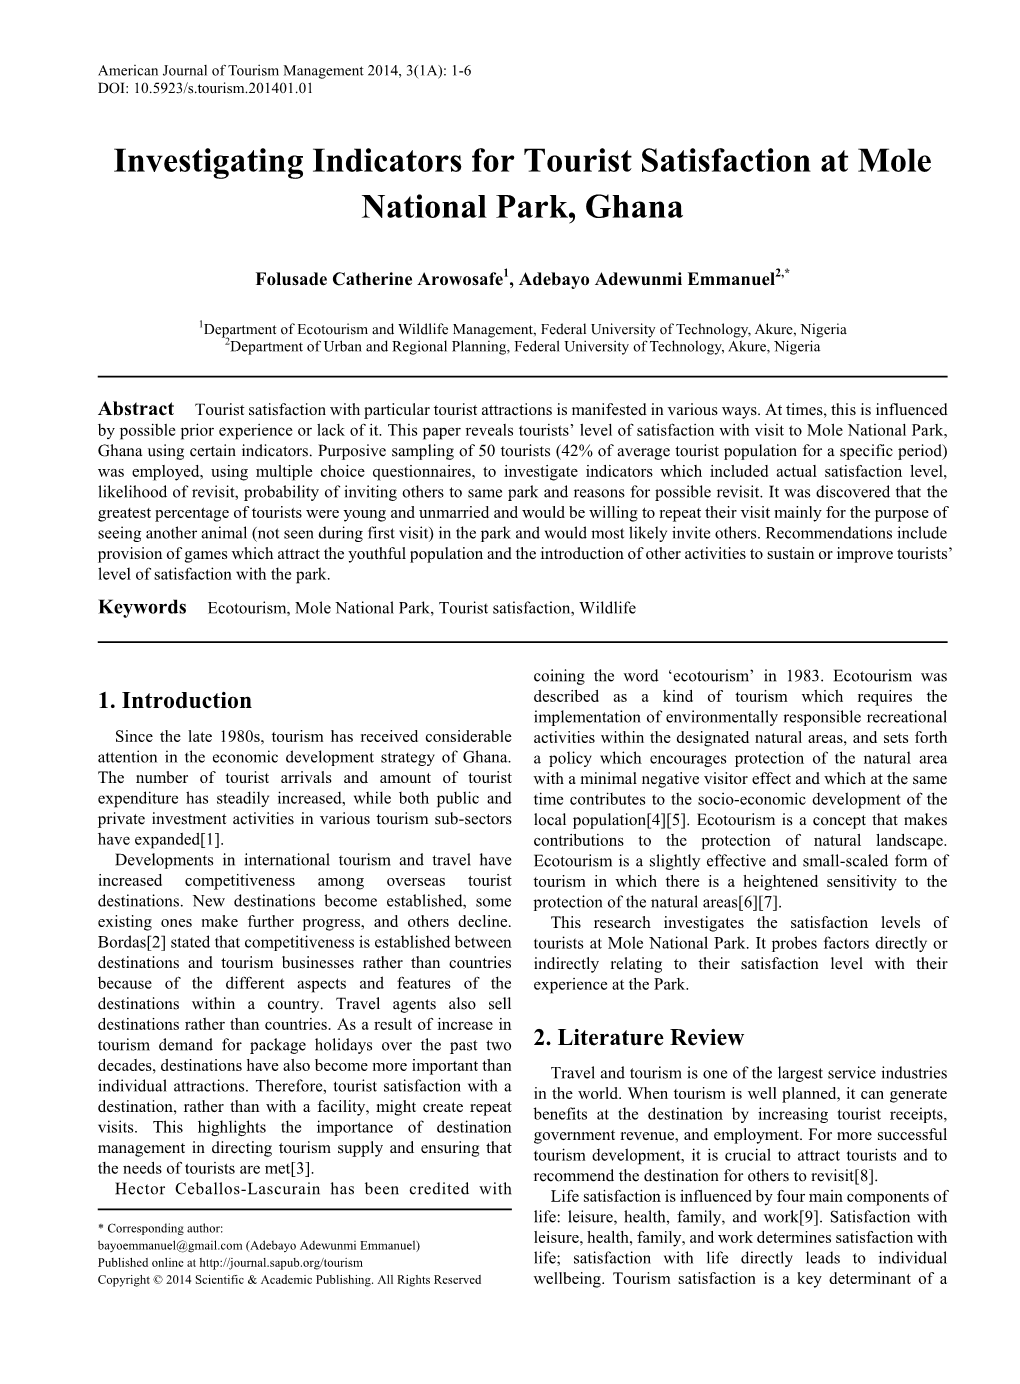 Investigating Indicators for Tourist Satisfaction at Mole National Park, Ghana